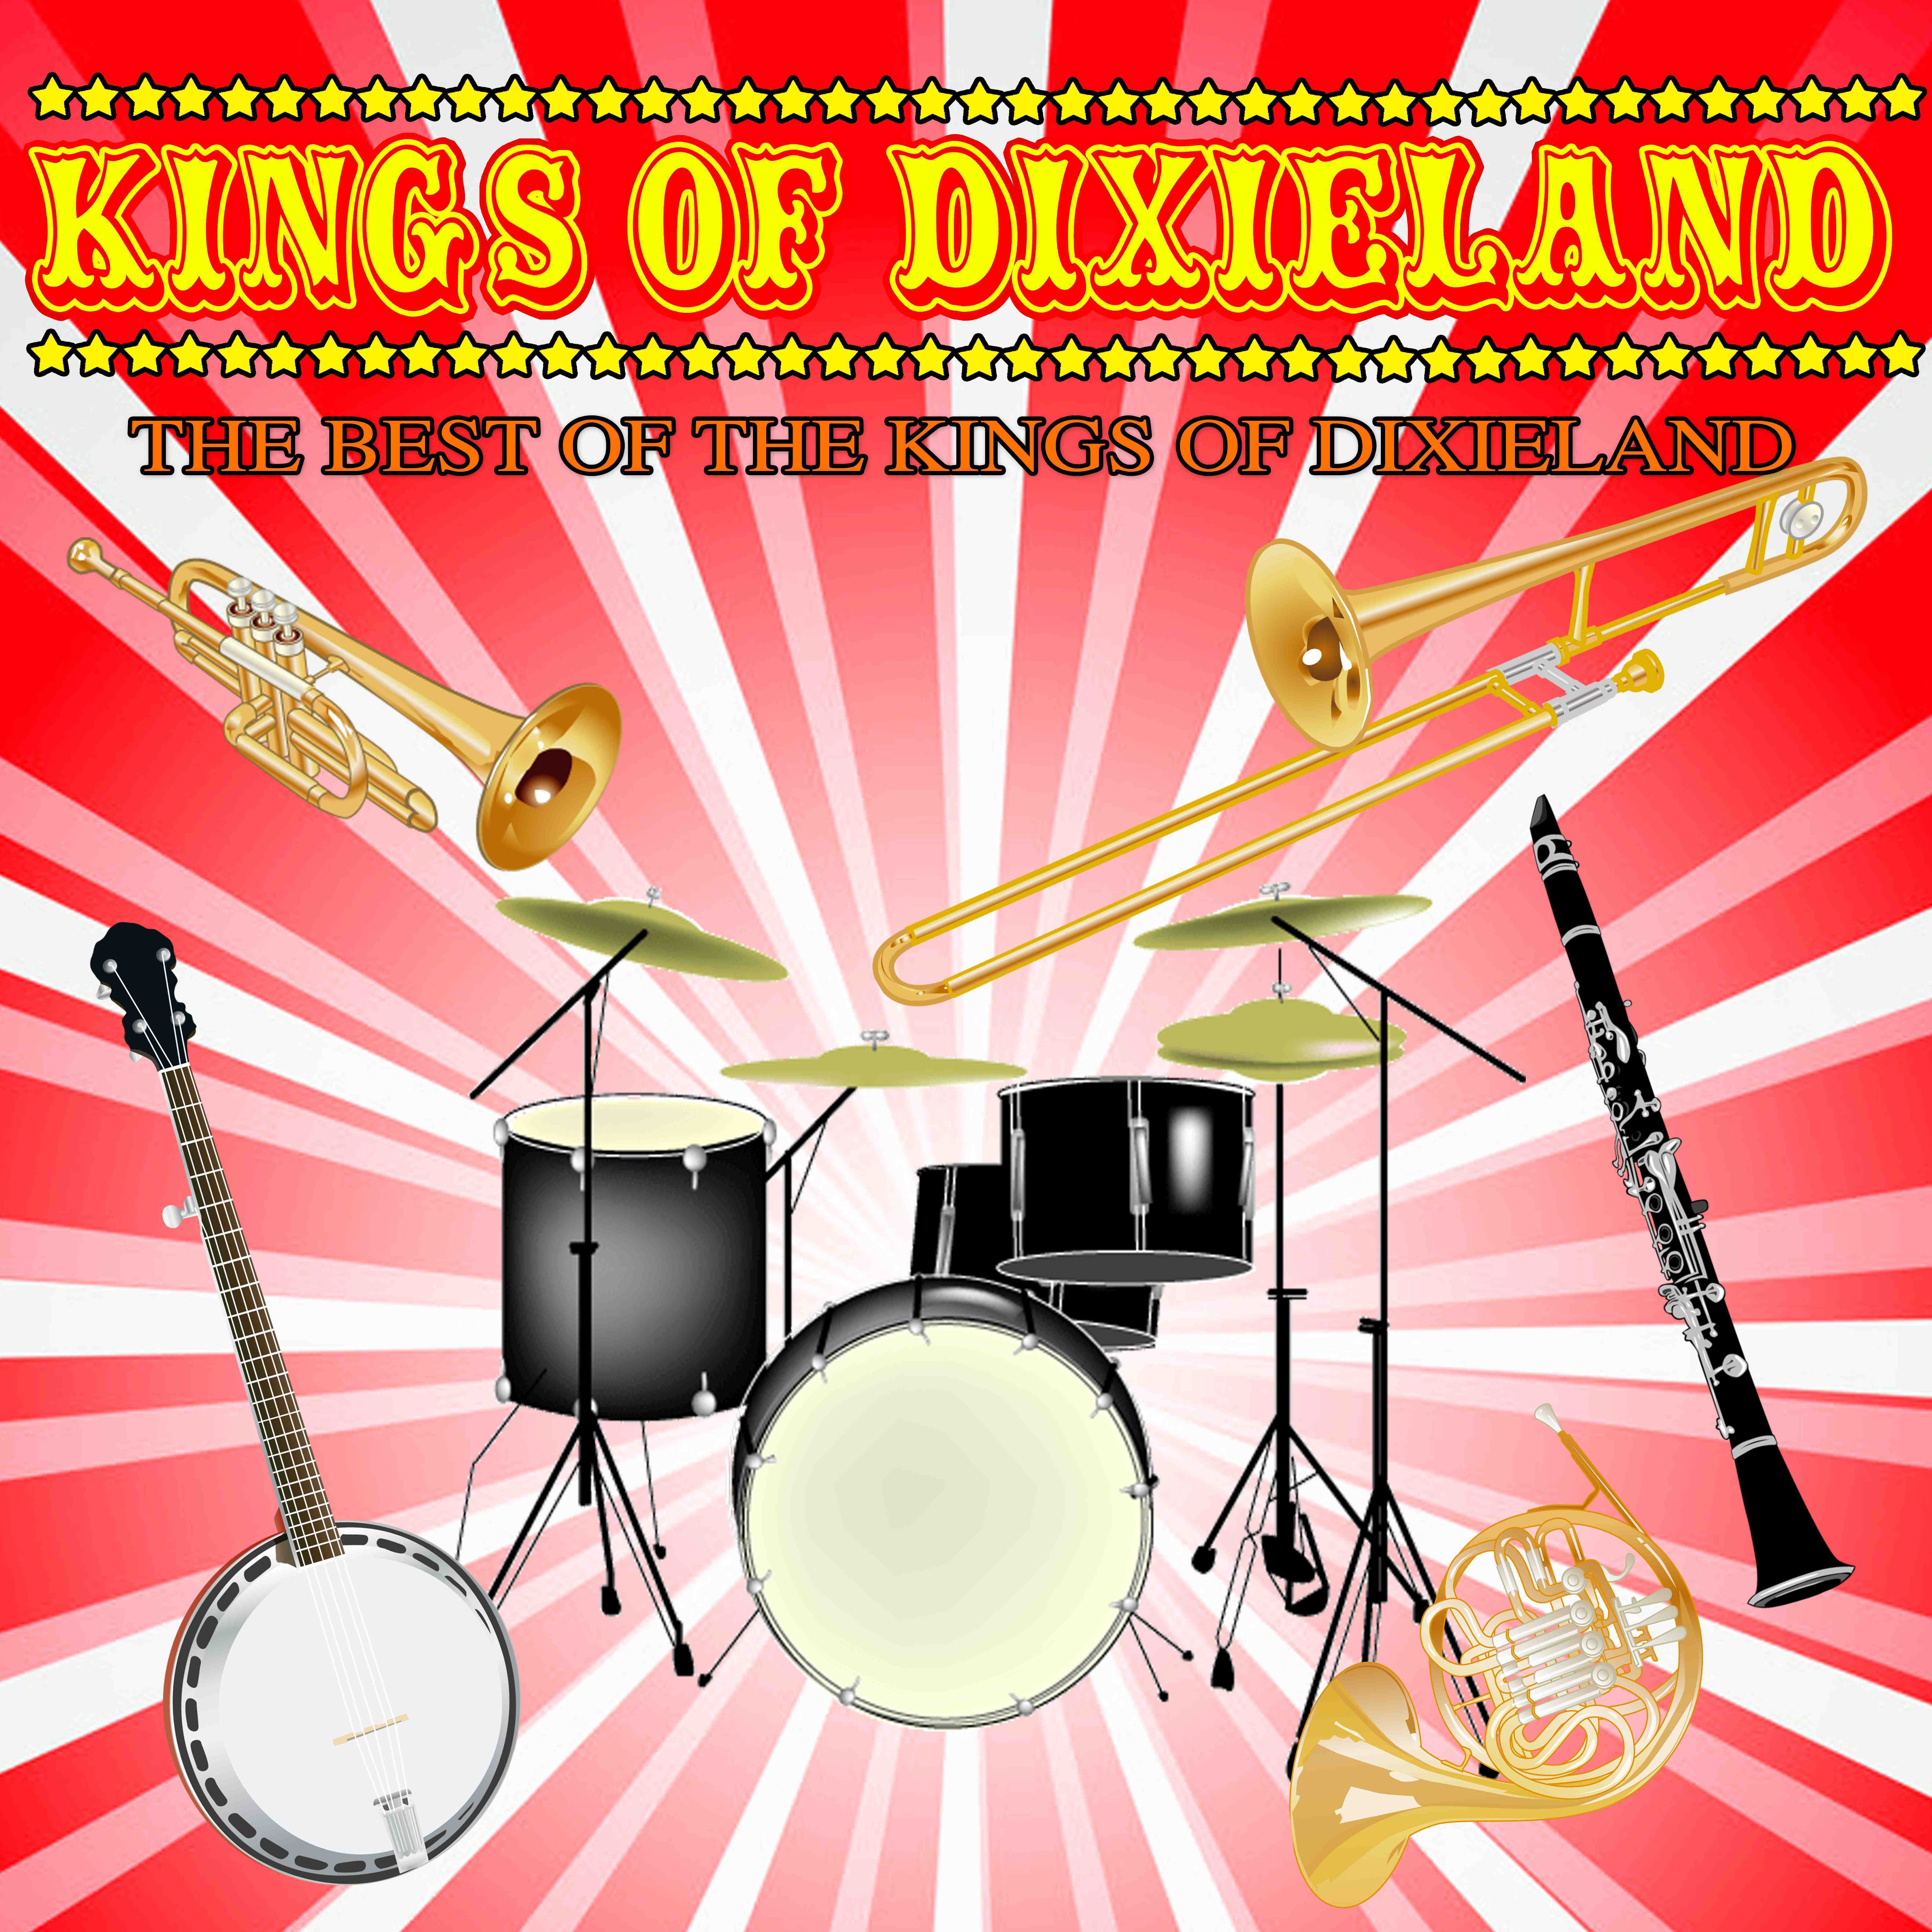 The Best Of The Kings Of Dixieland